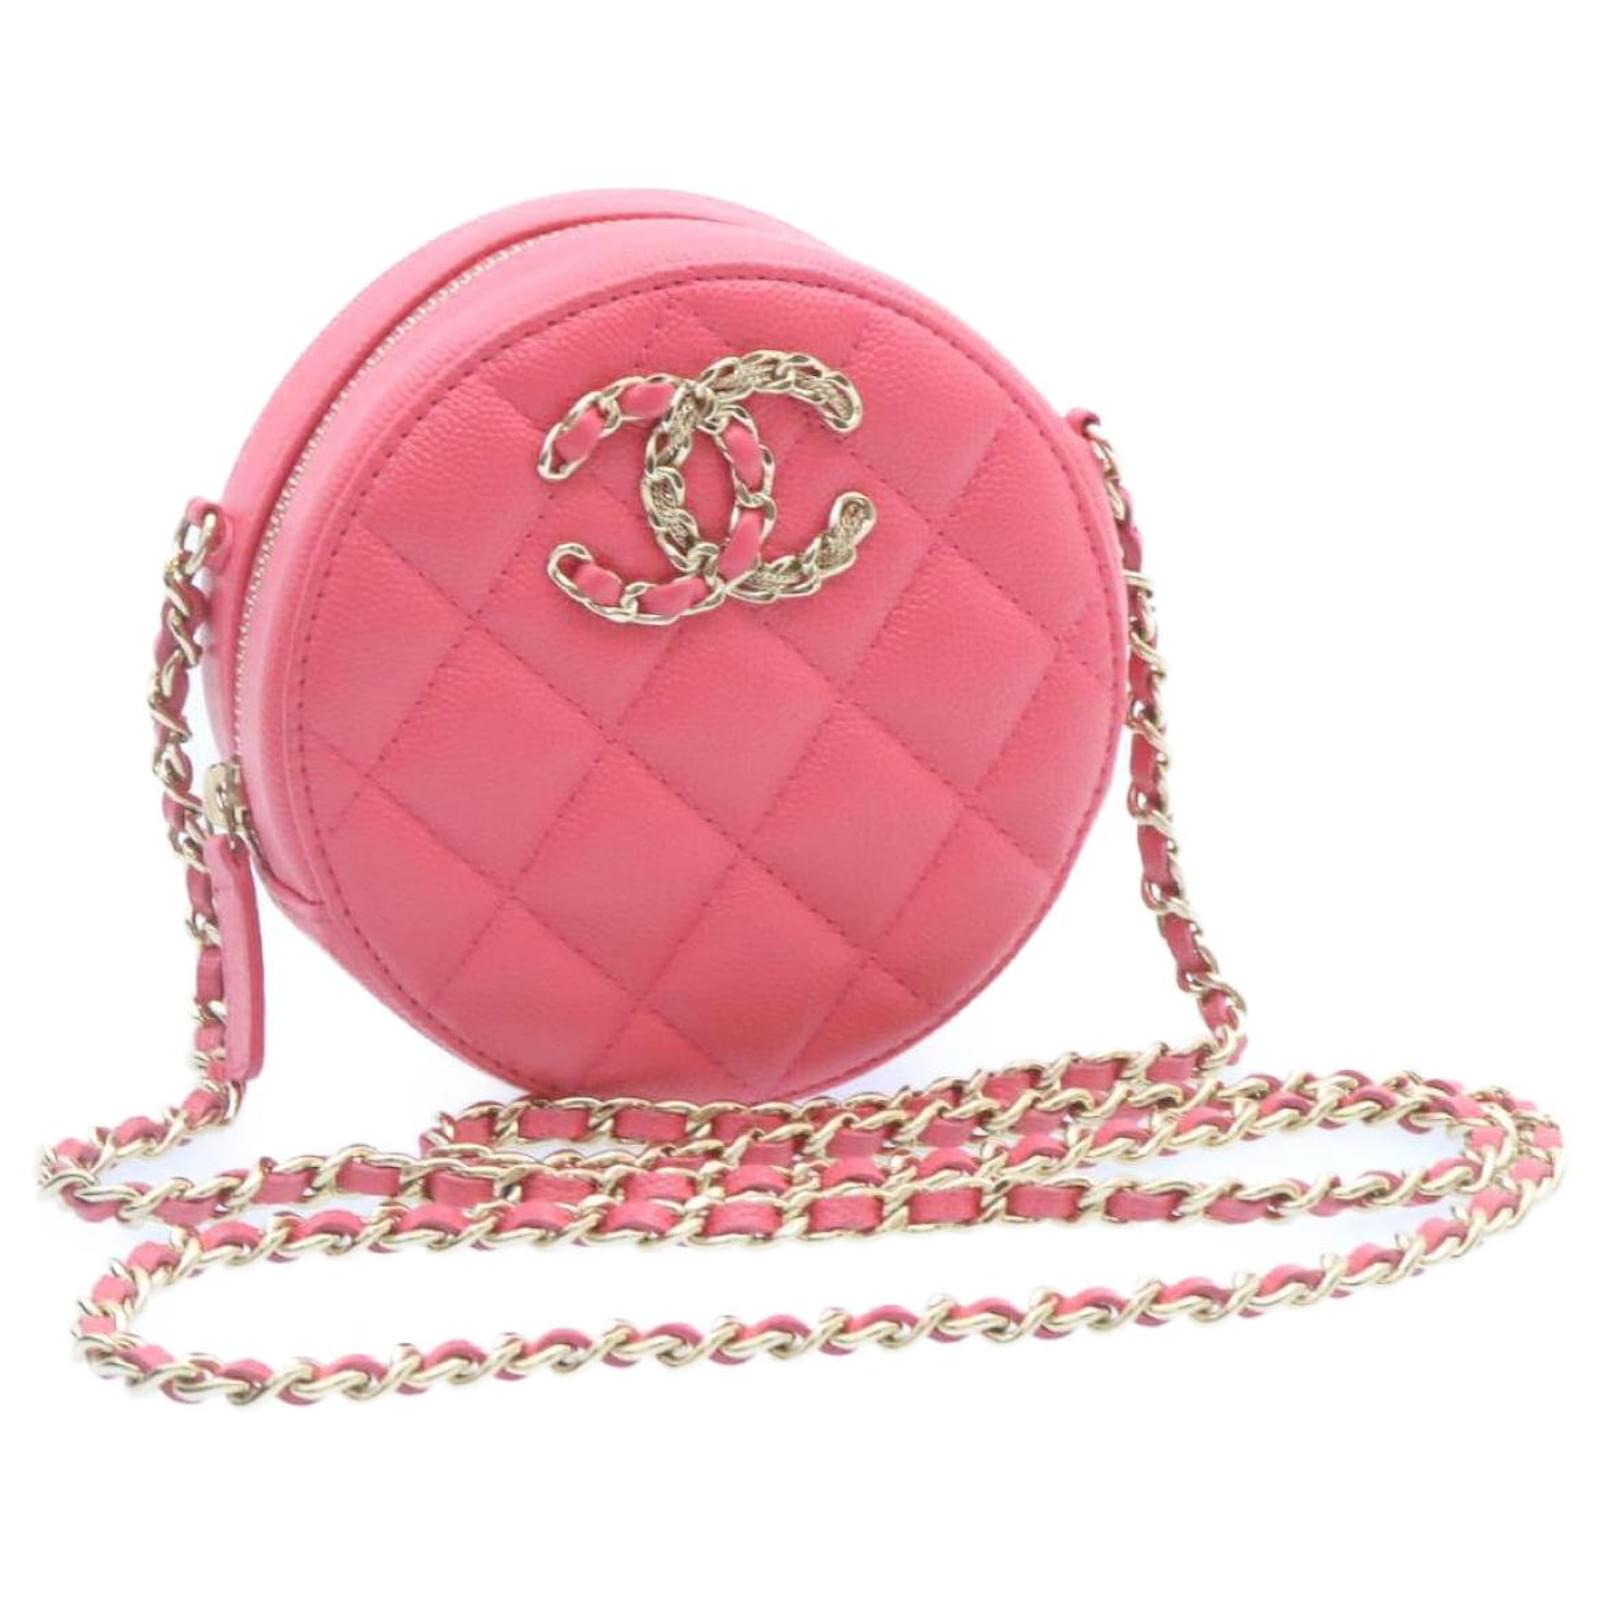 chanel bag double chain